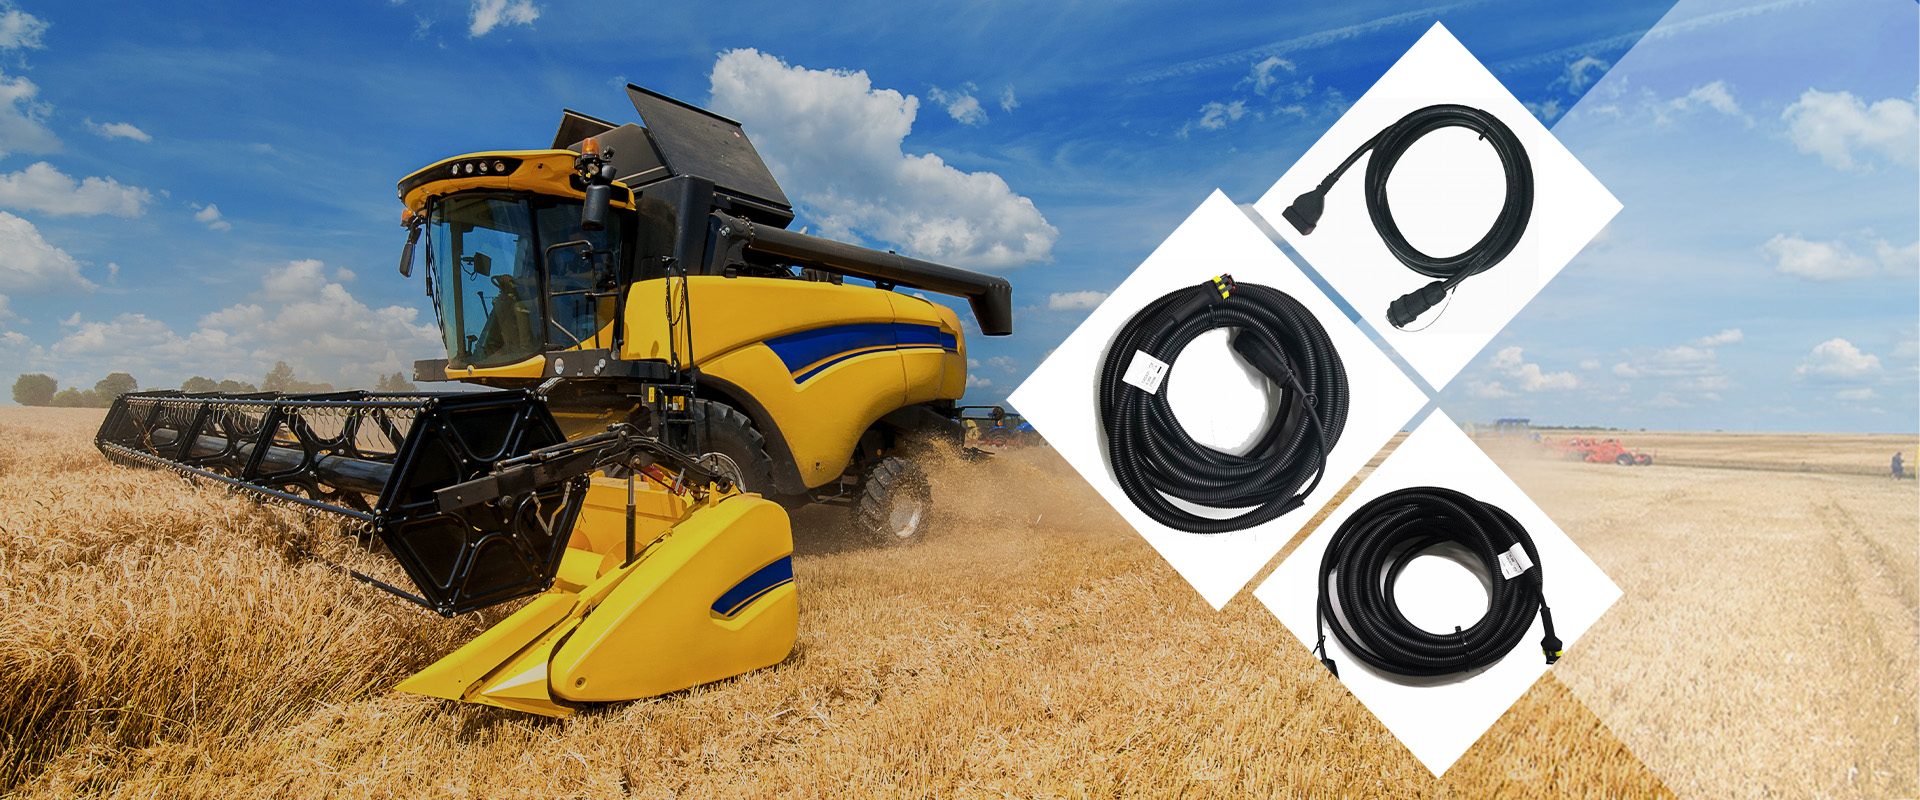 PROFESSIONAL AGRICULTURAL MACHINERY